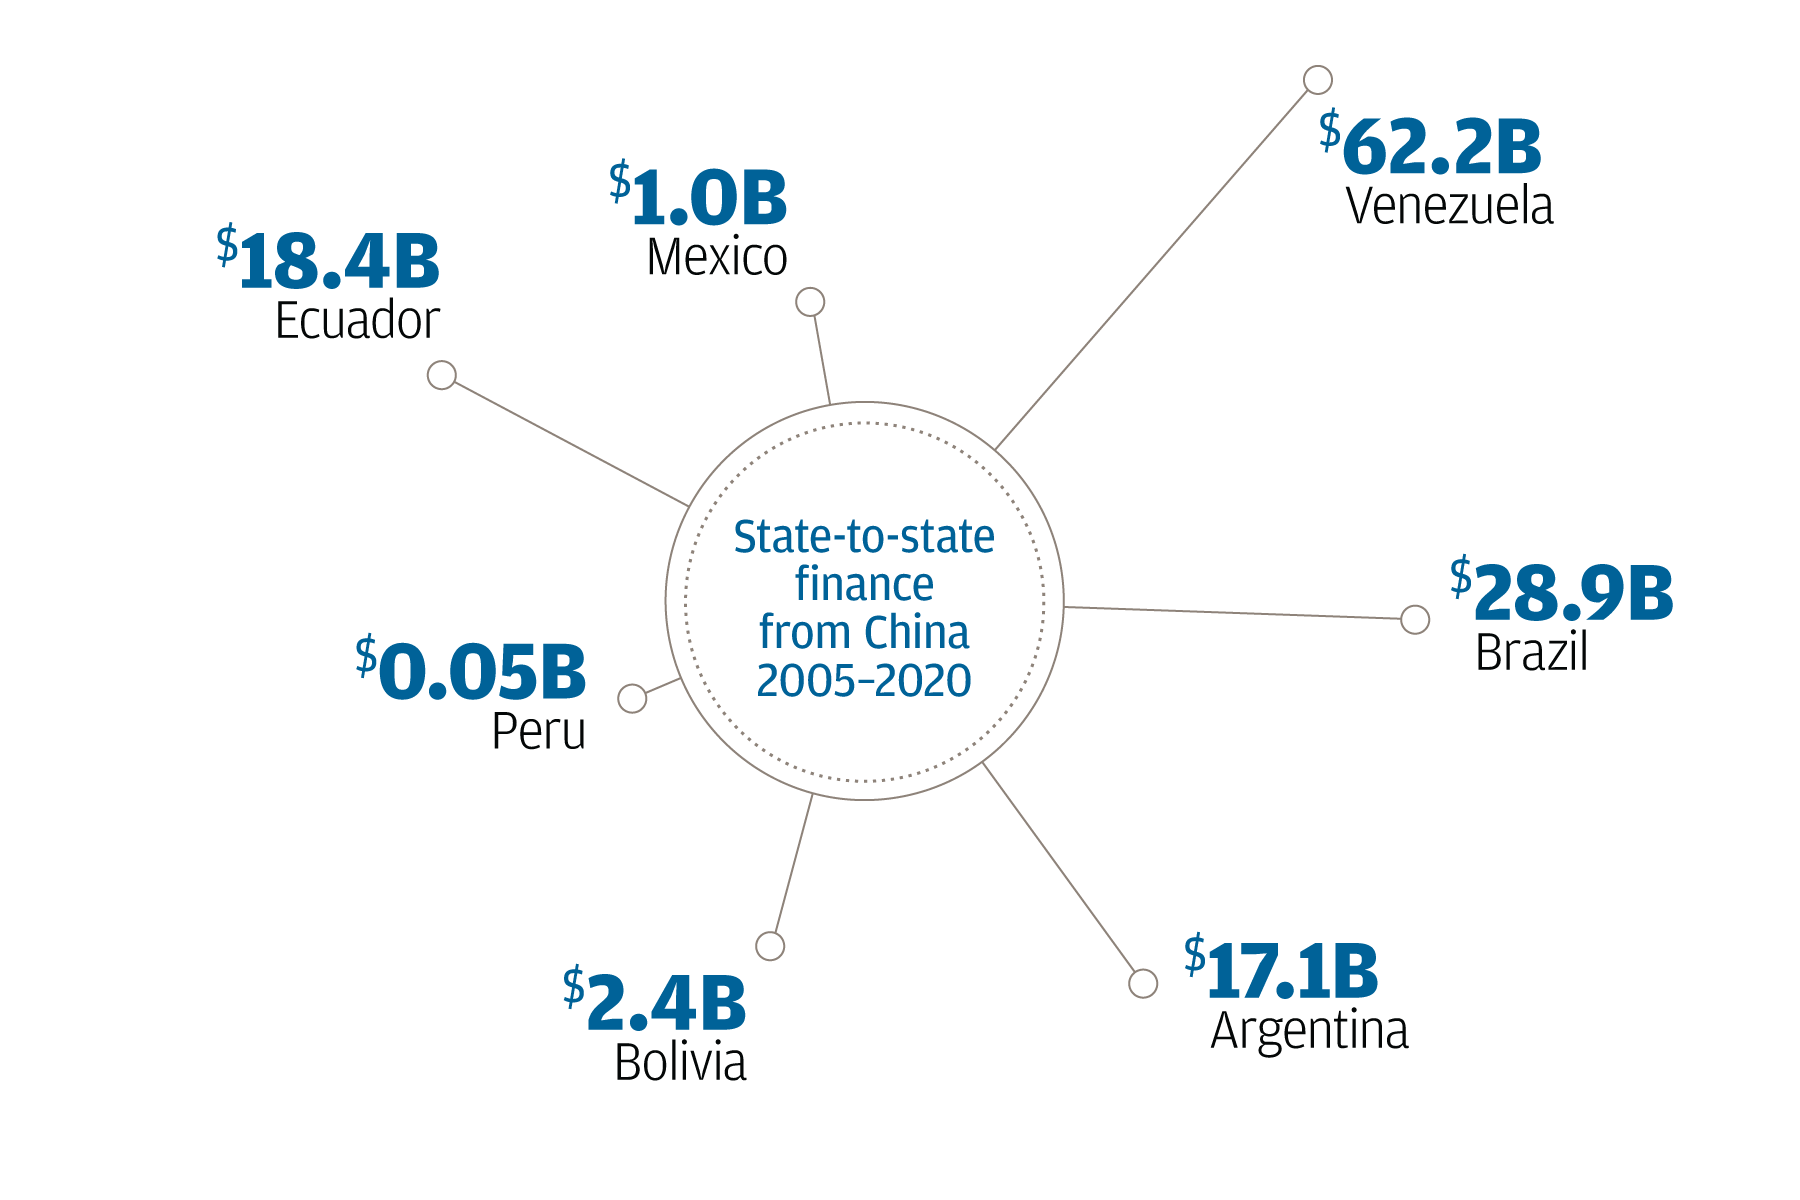 A graphic illustrating state-to-state financing from China to Latin American countries from 2005 to 2020. Venezuela received $62.2B in lending, Brazil $28.9B, Argentina $17.1B, Bolivia $2.4B, Peru $0.05B, Ecuador $18.4B and Mexico $1.0B.